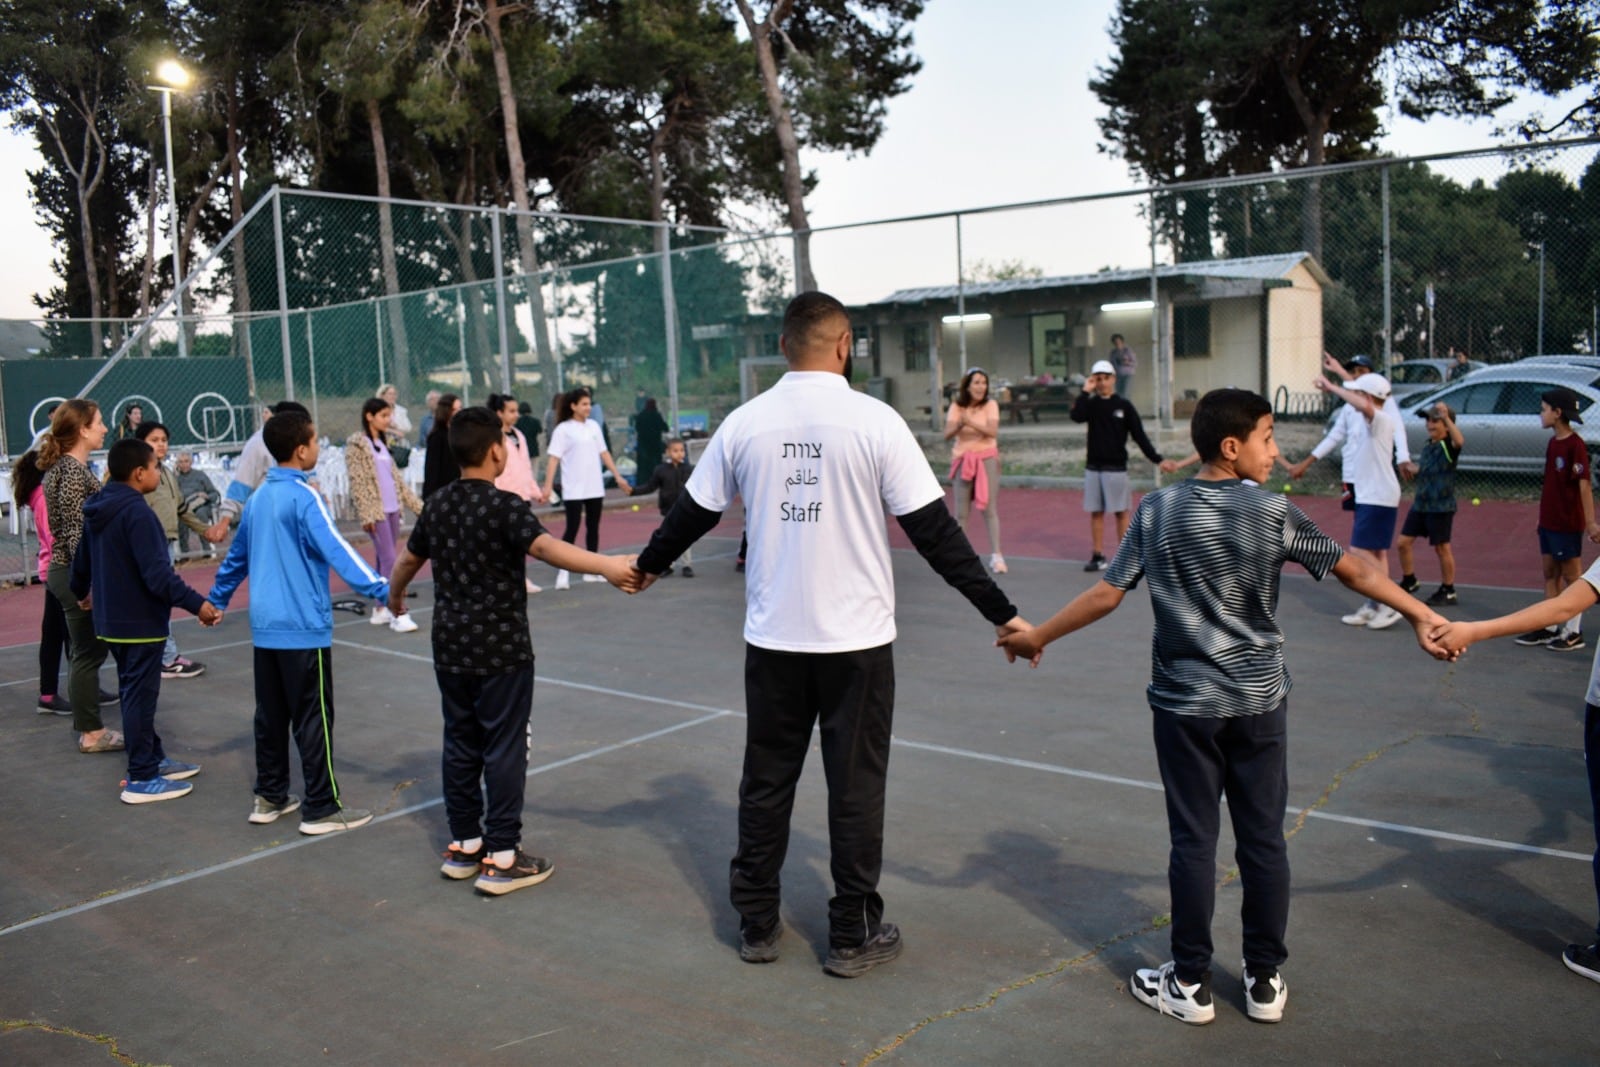 Israeli Jews and Arabs find hope for coexistence in tennis [Video]